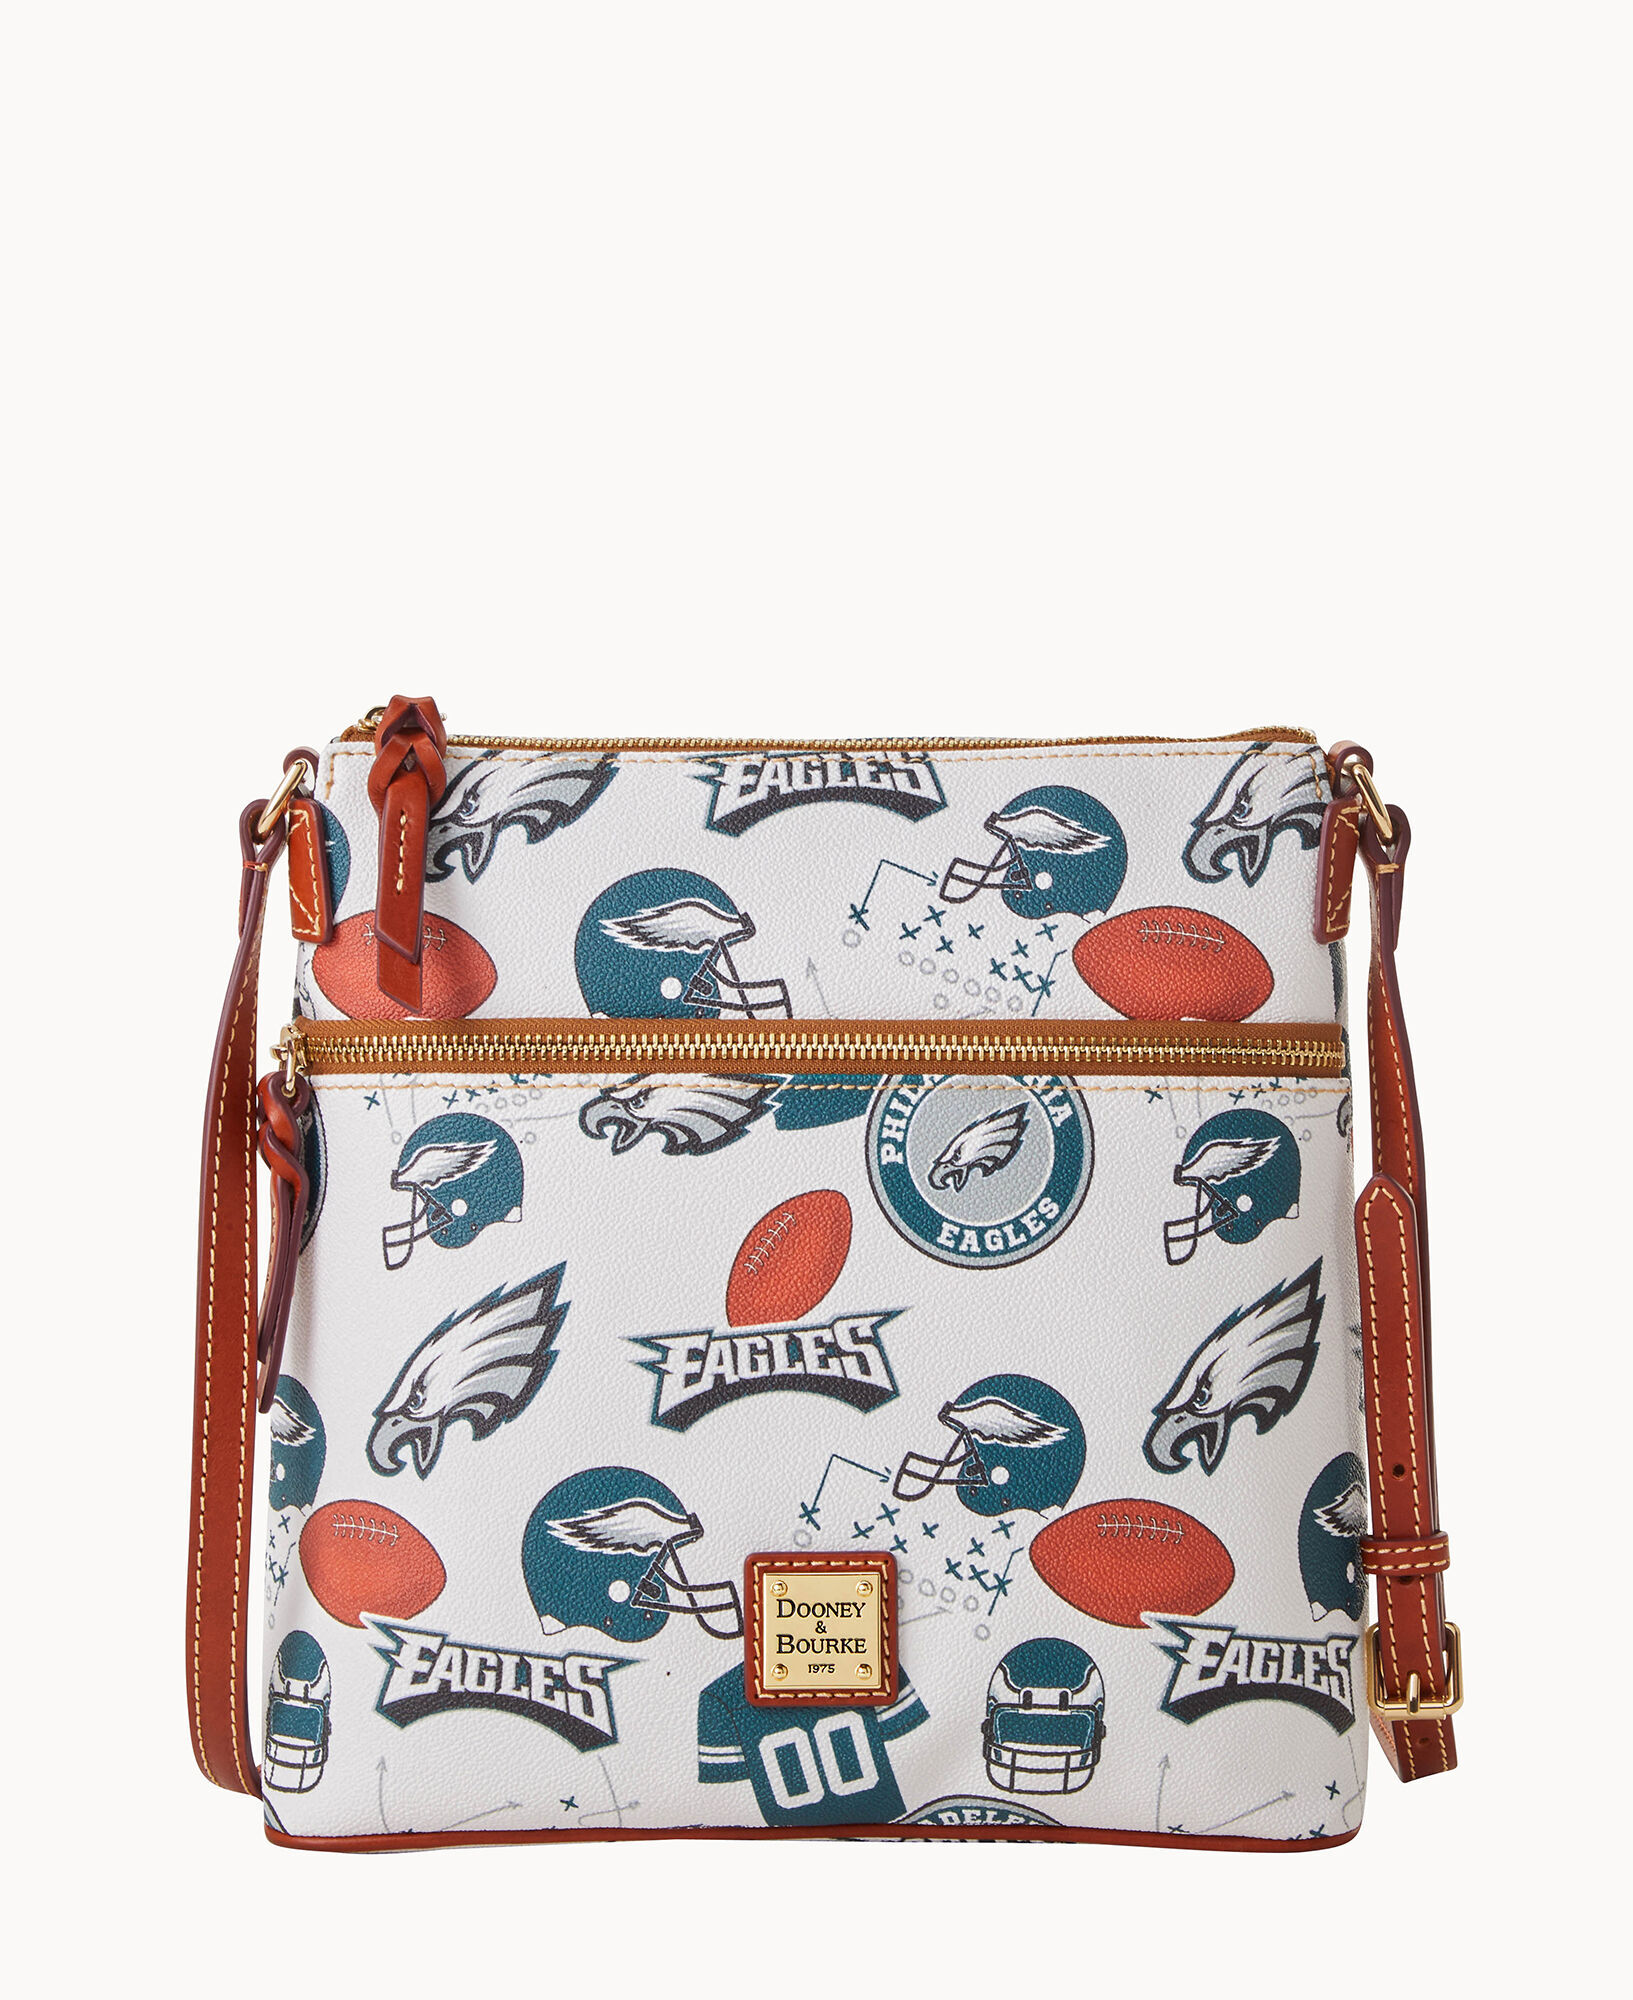 dooney and bourke eagles purse